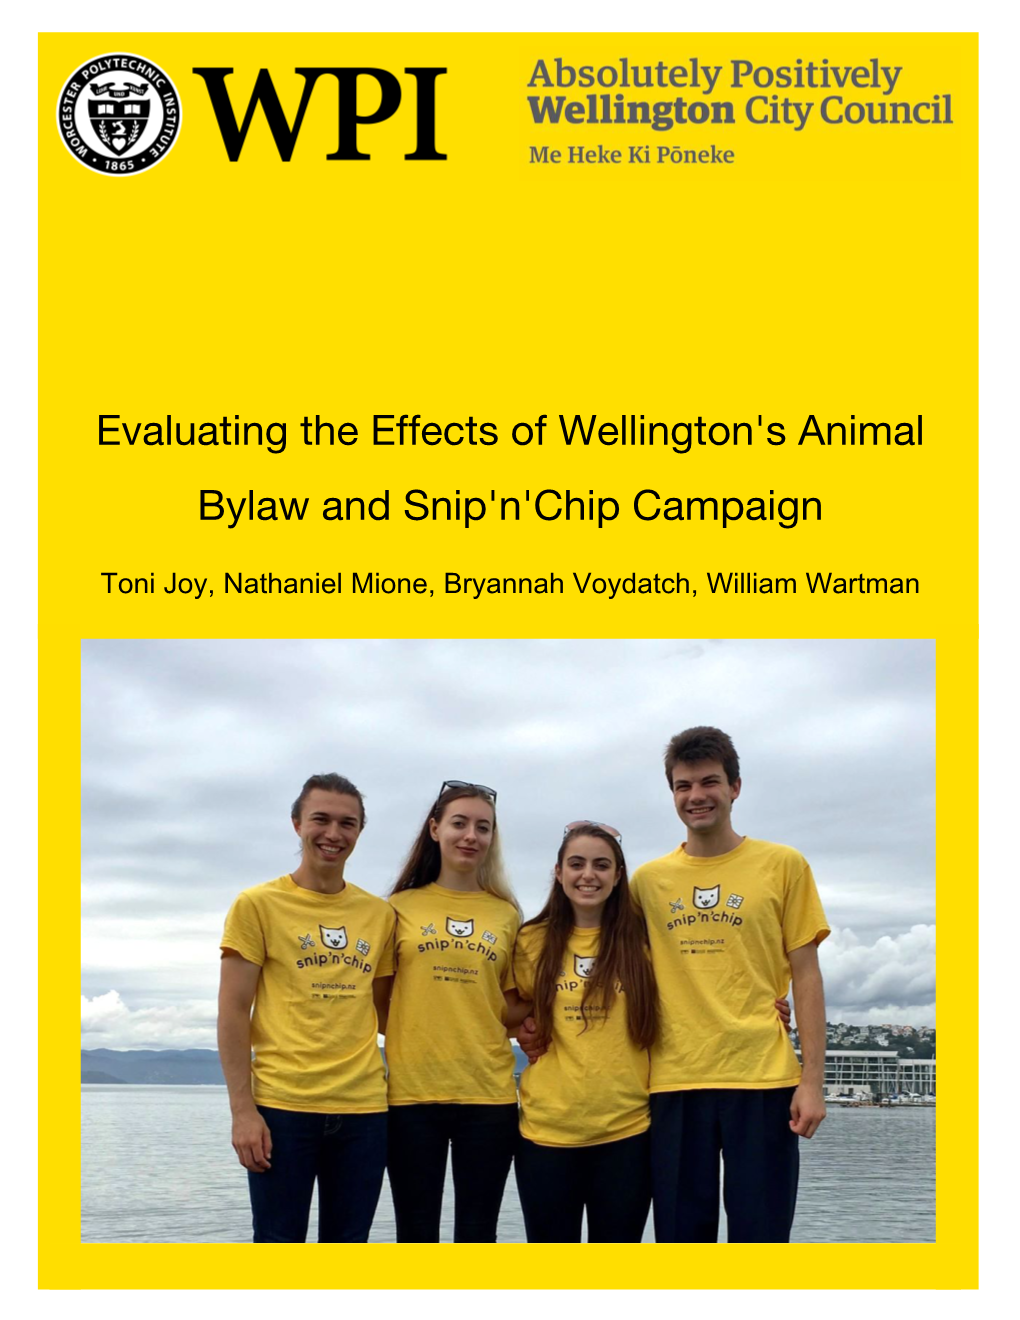 Evaluating the Effects of Wellington's Animal Bylaw and Snip'n'chip Campaign